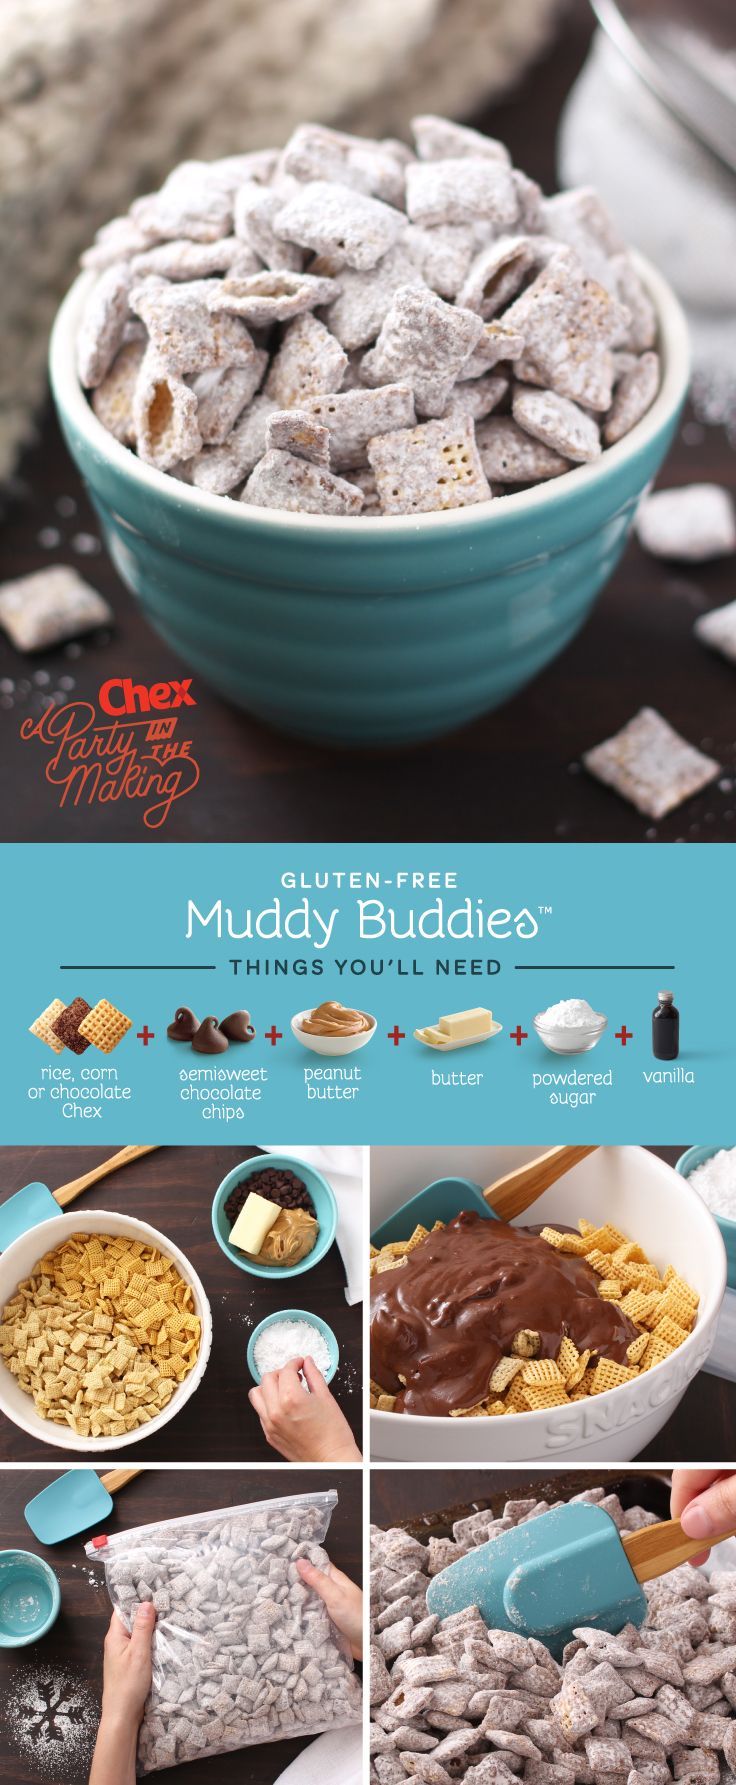 What could be better than a fresh batch of Muddy Buddies? A fresh batch of this holiday treat on a snowy day next to a cozy